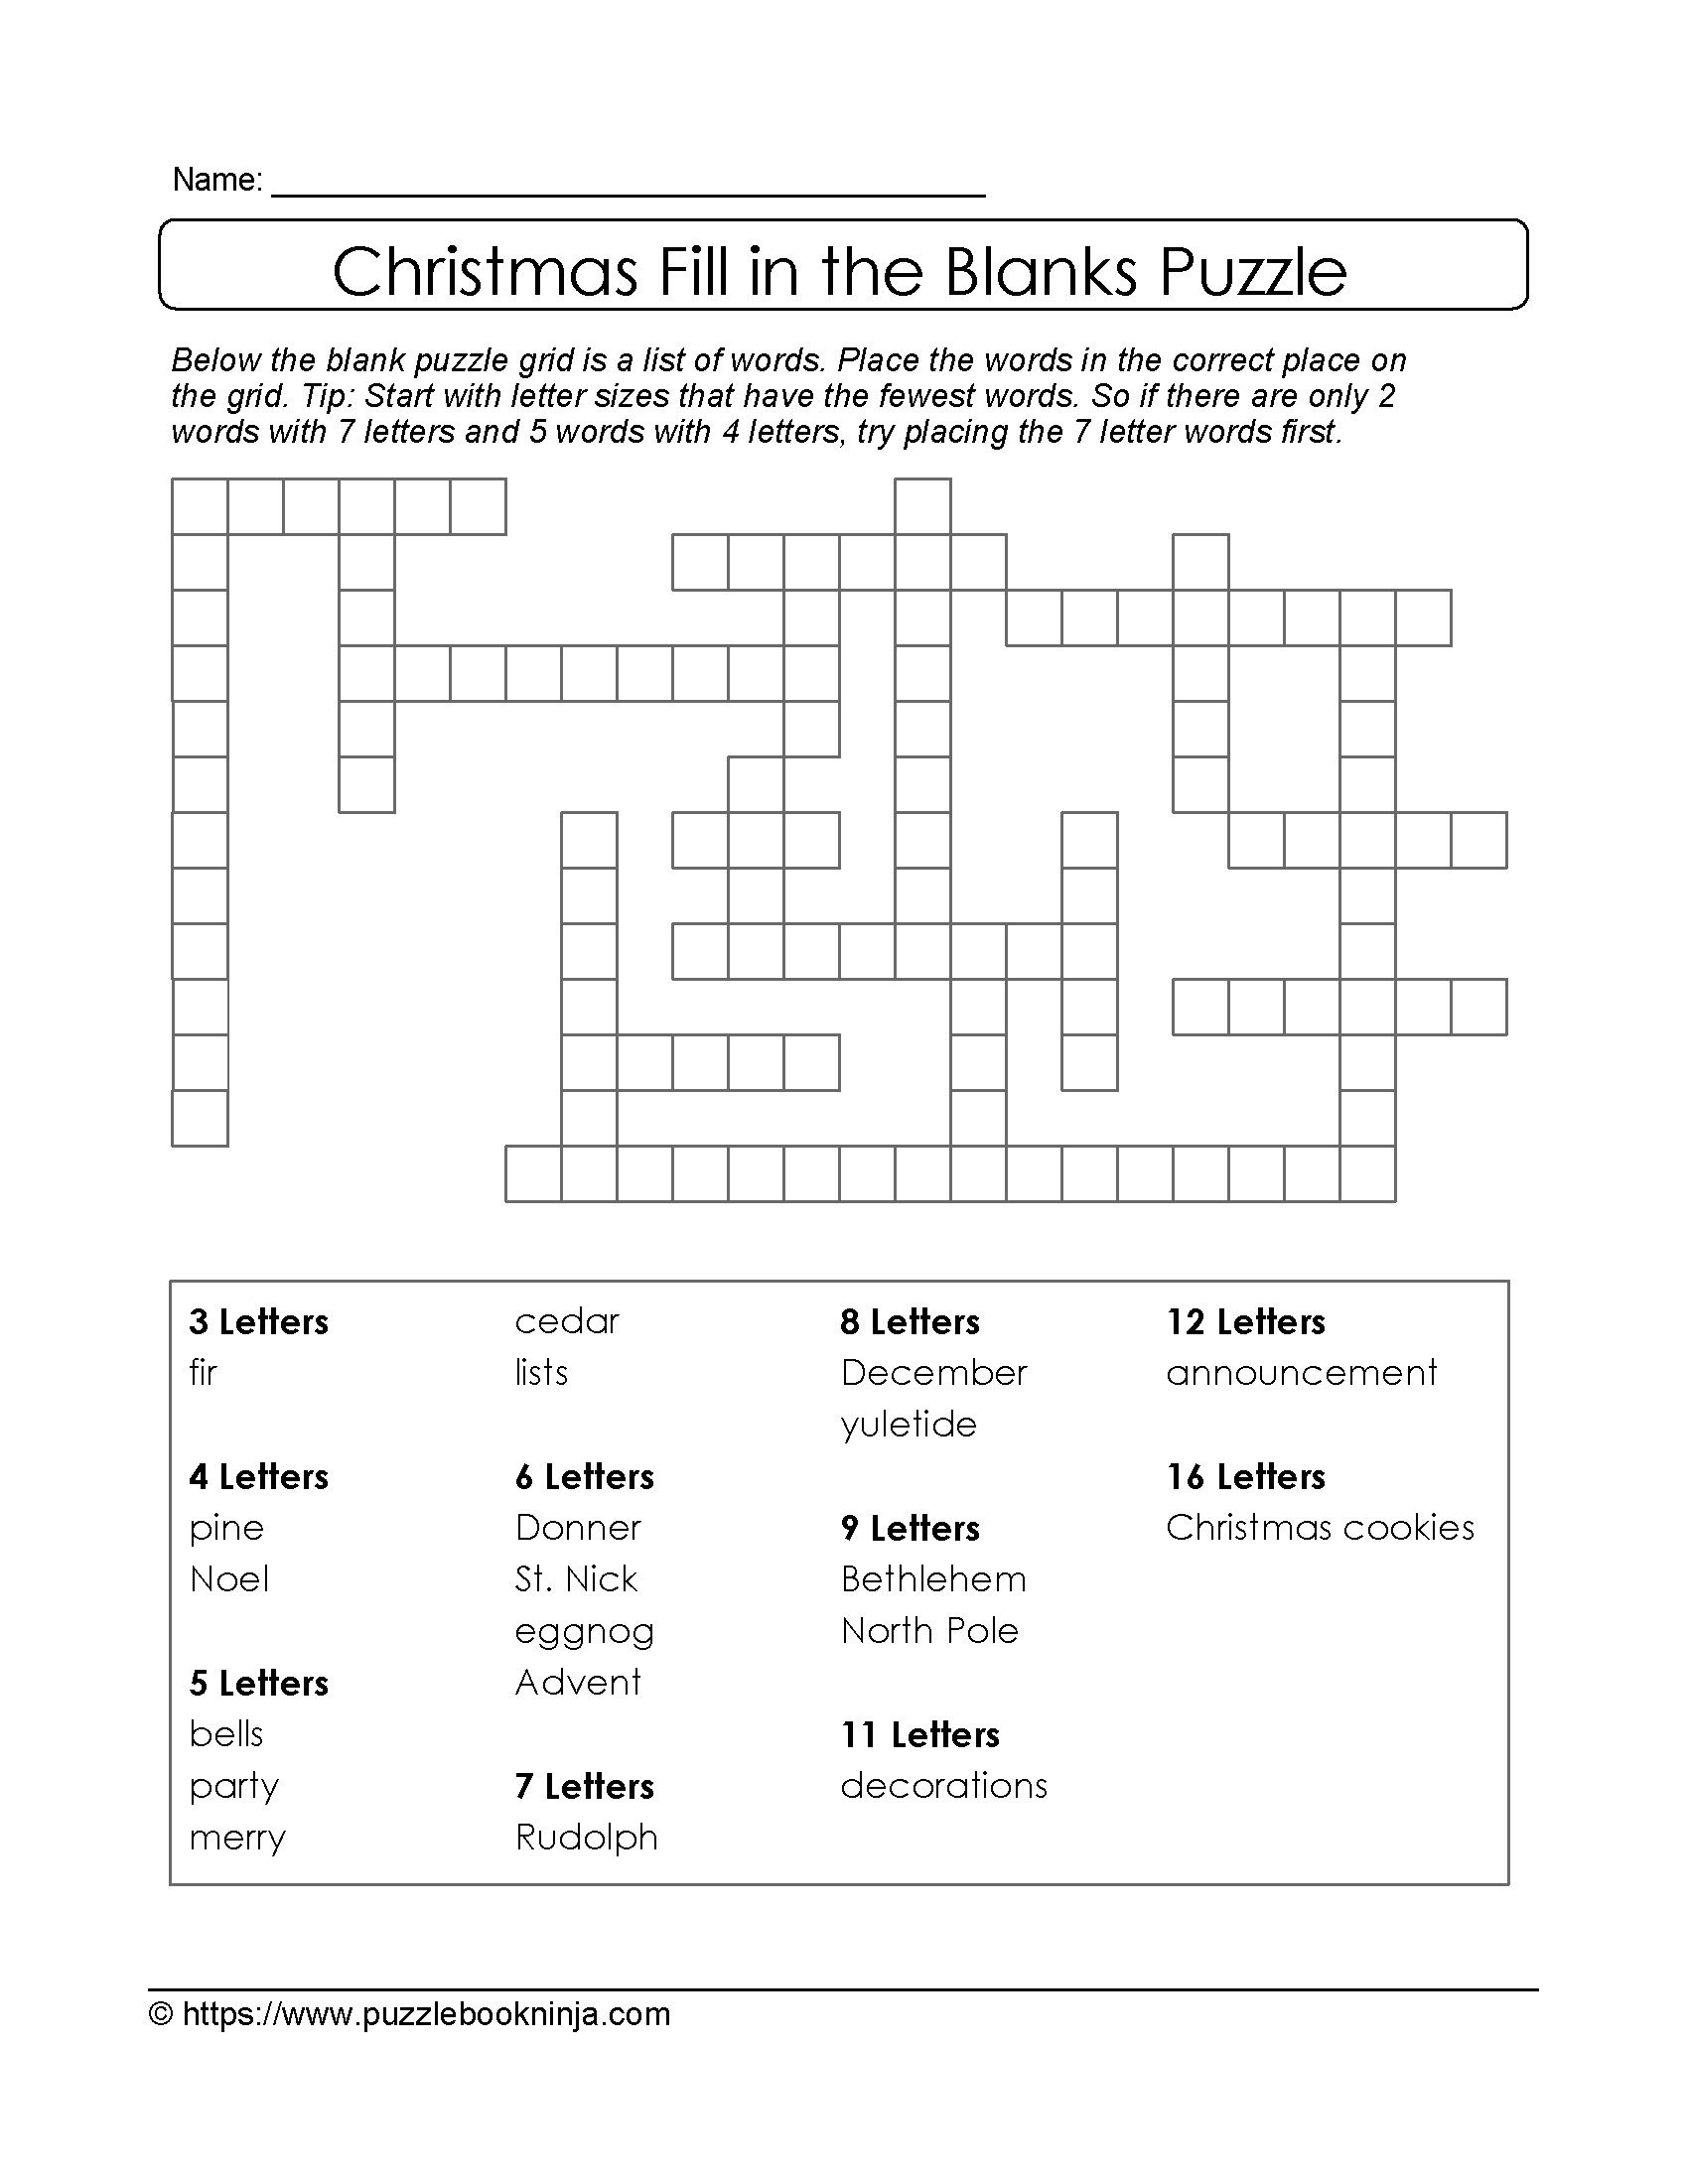 Christmas Printable Puzzle. Free Fill In The Blanks. | Christmas - Printable Christmas Crossword Puzzles For Adults With Answers